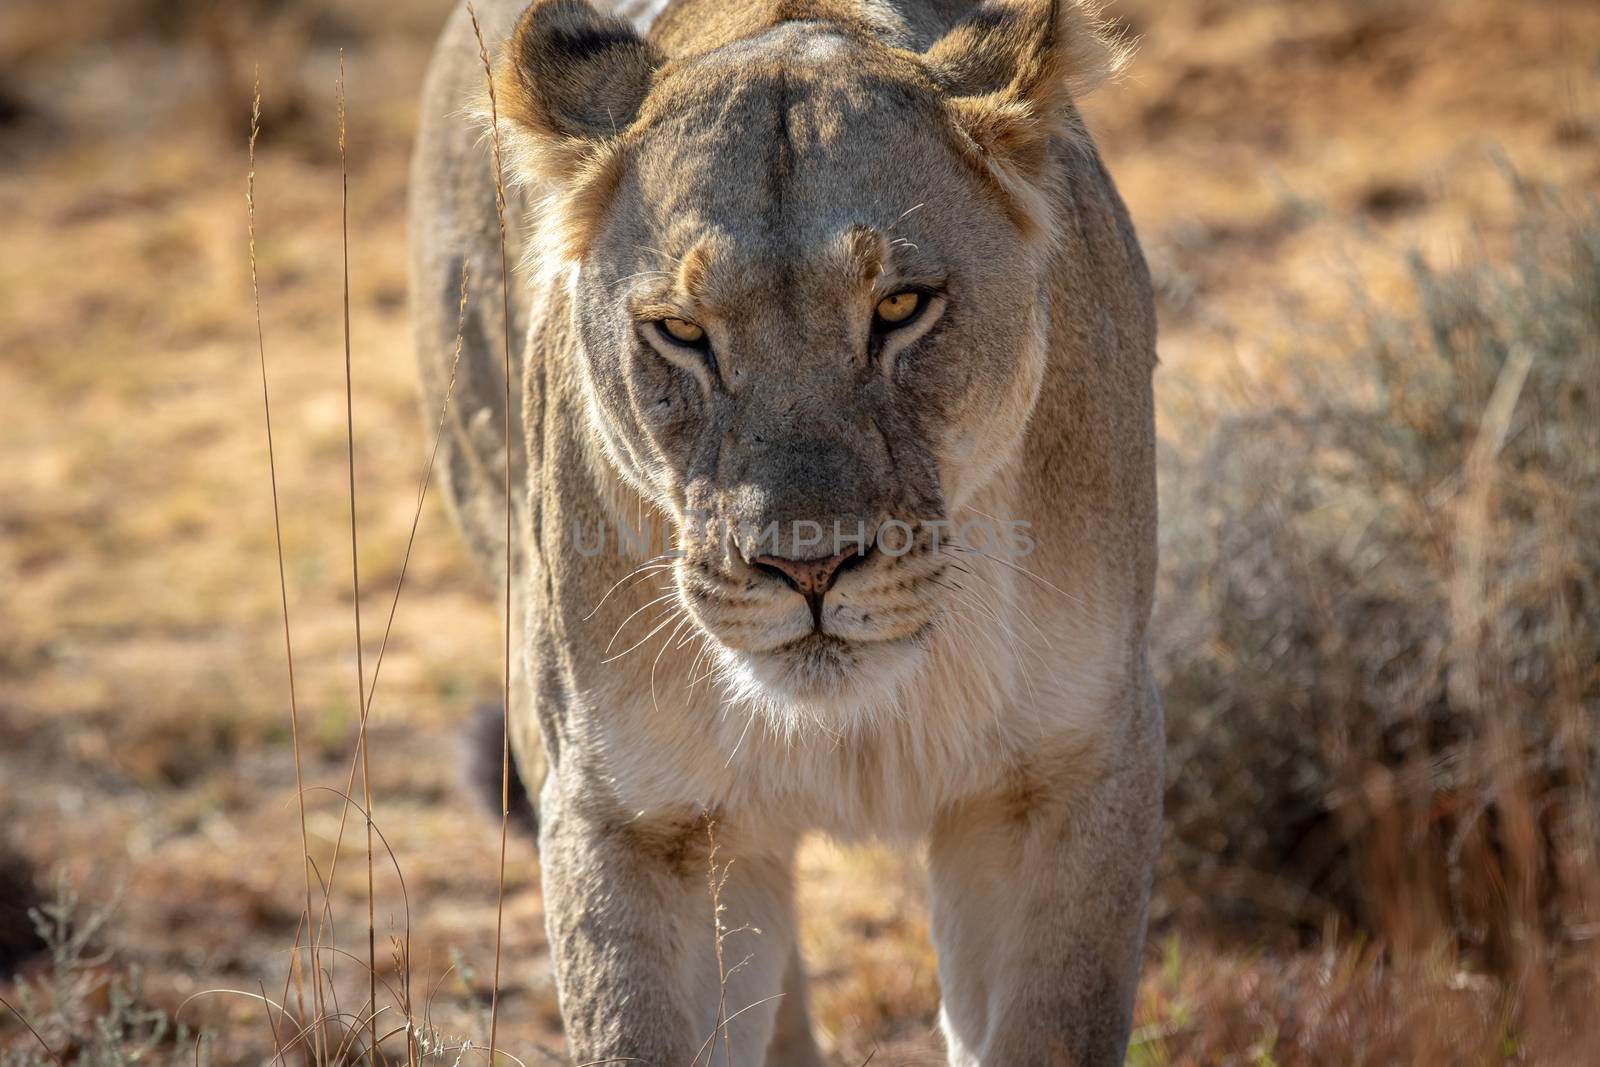 Lioness walking towards the camera in the Welgevonden game reserve, South Africa.